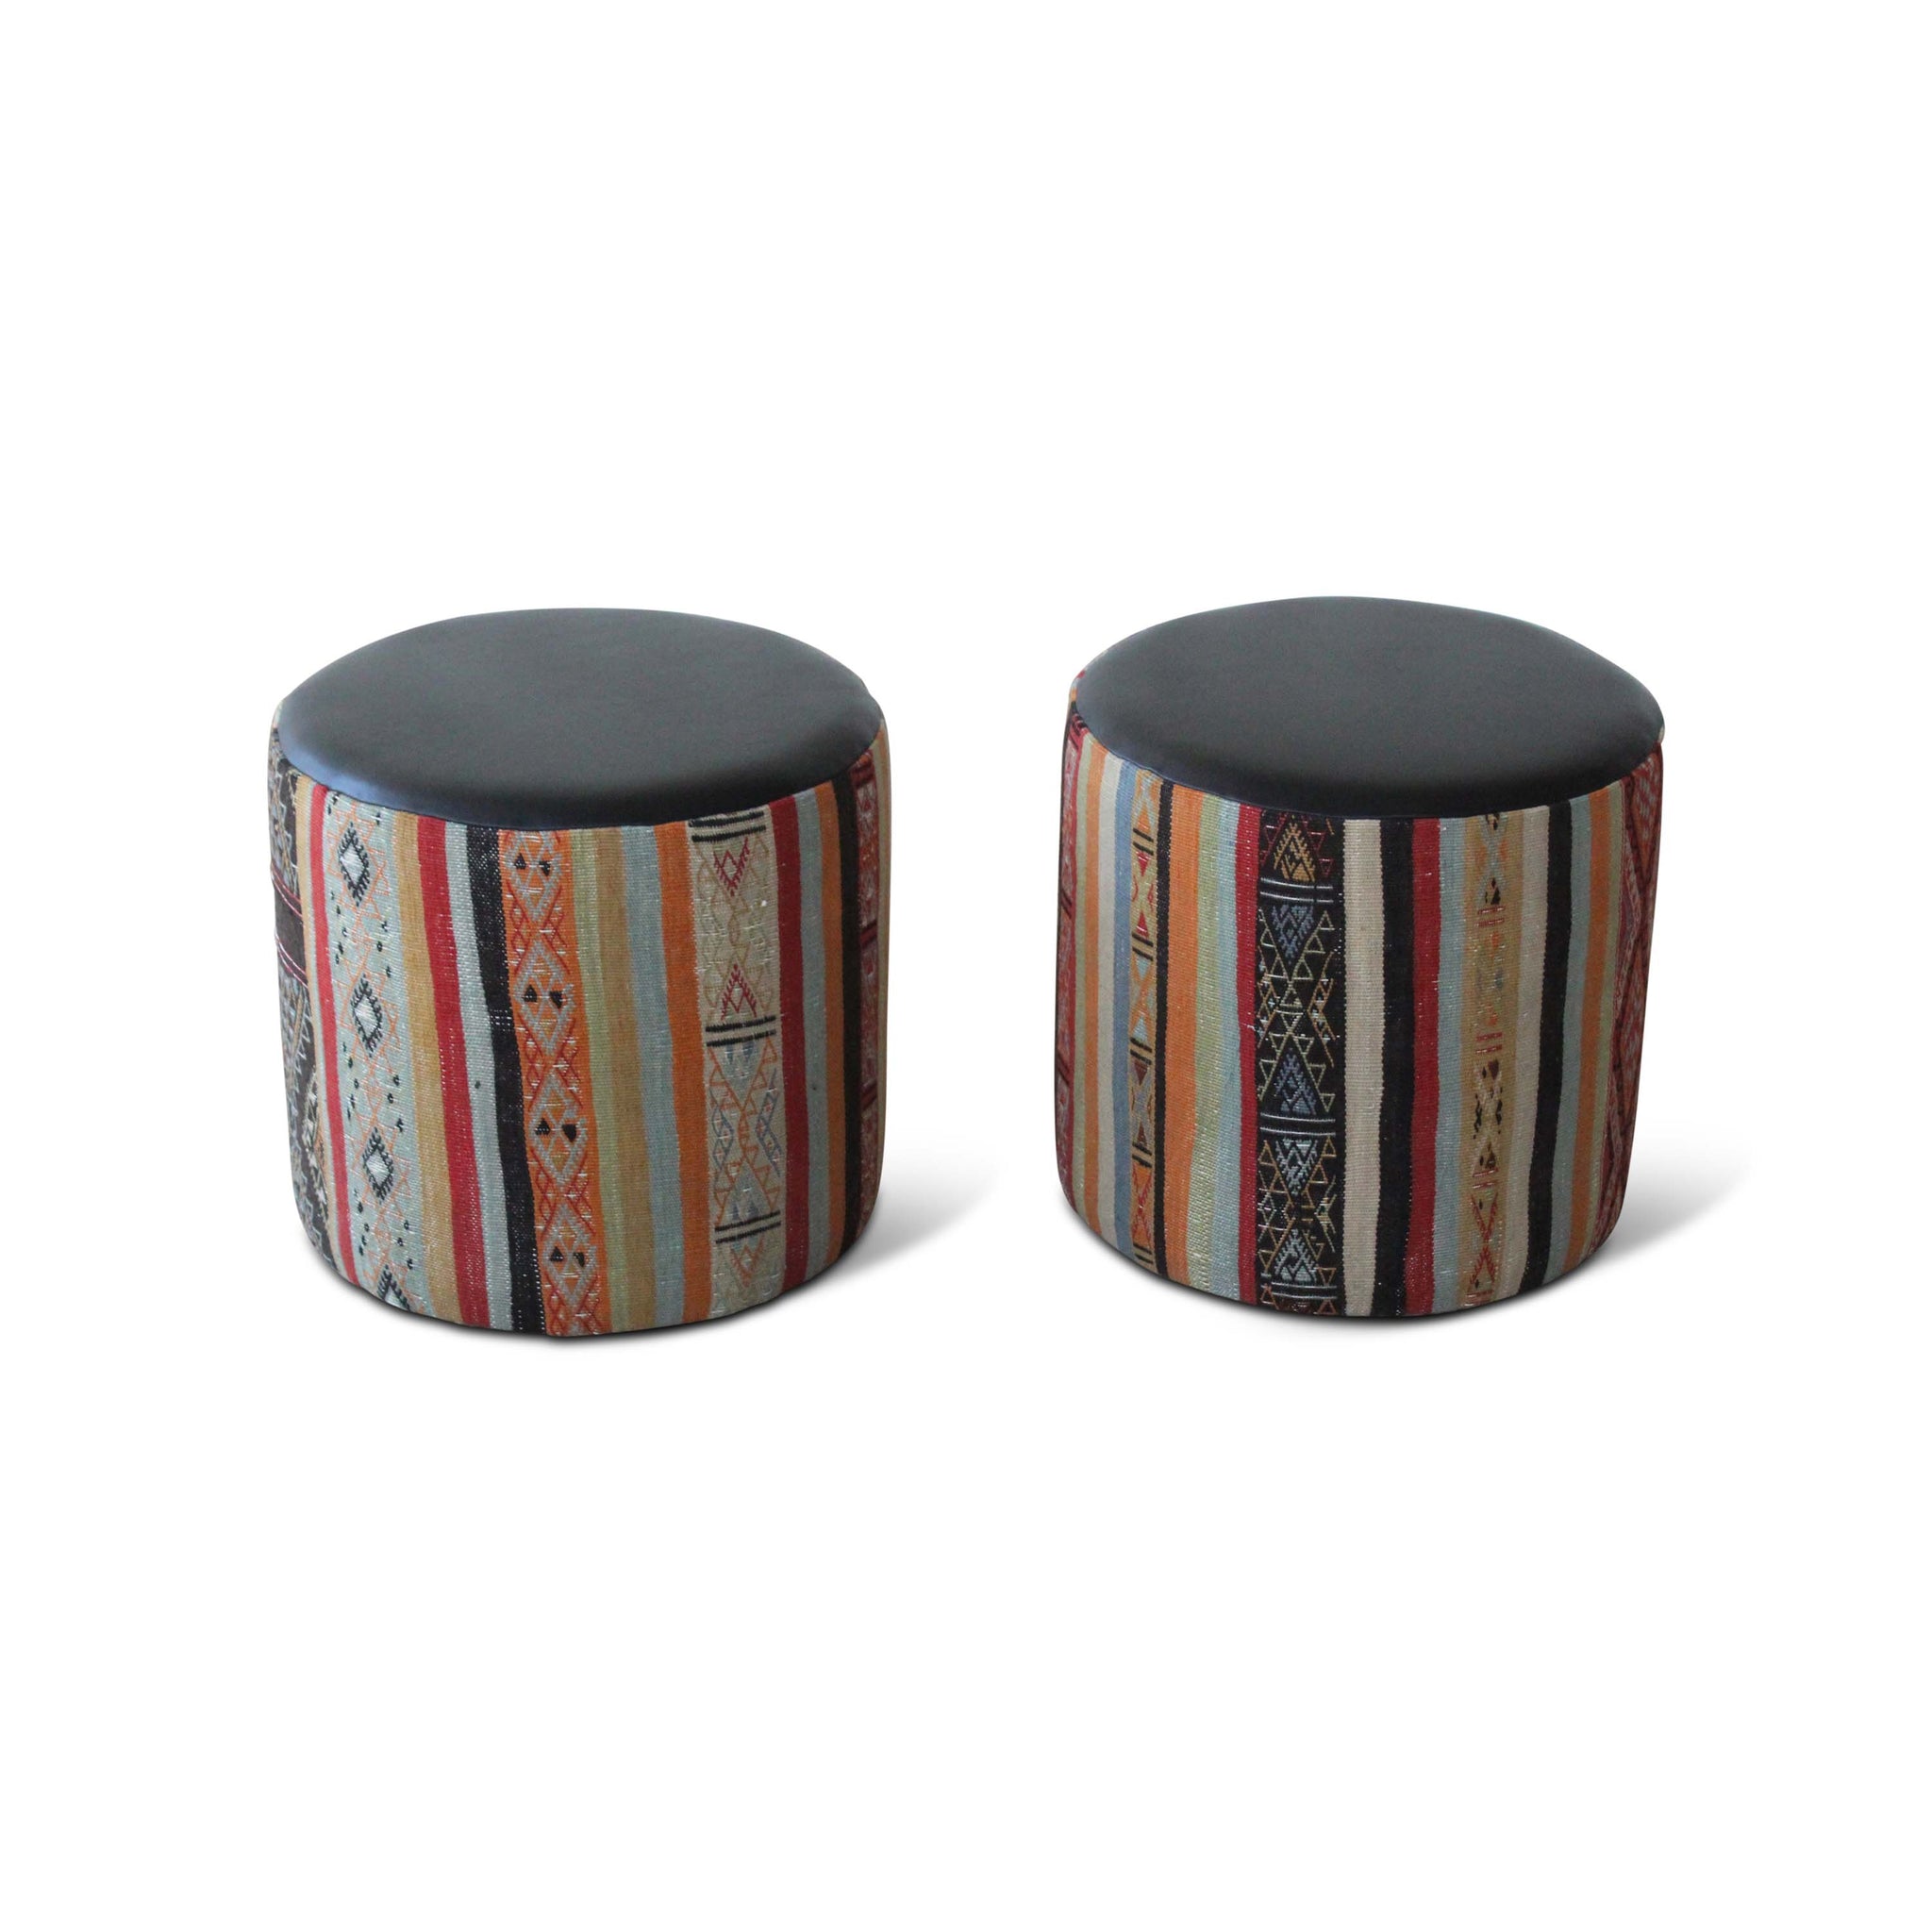 Vintage Pair of Moroccan Kilim and Leather Upholstered Poufs